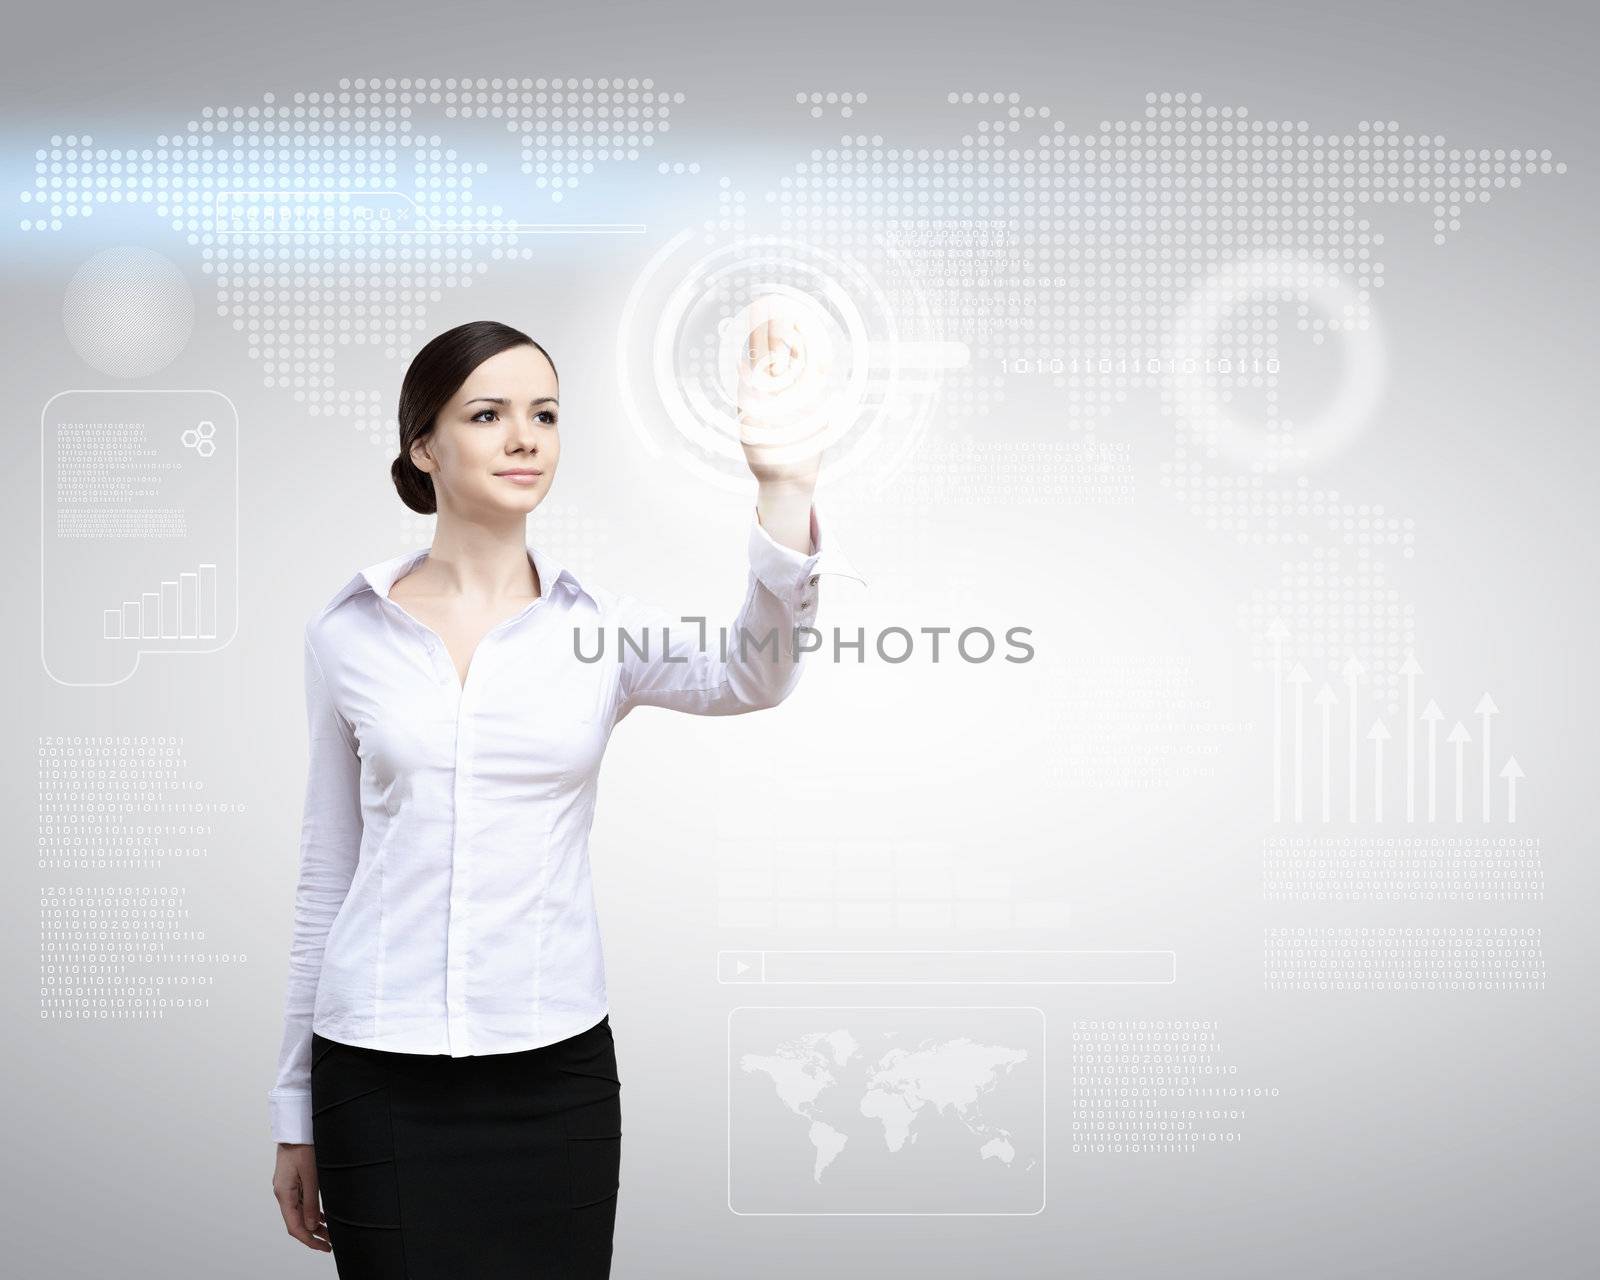 Business person working with modern virtual technology